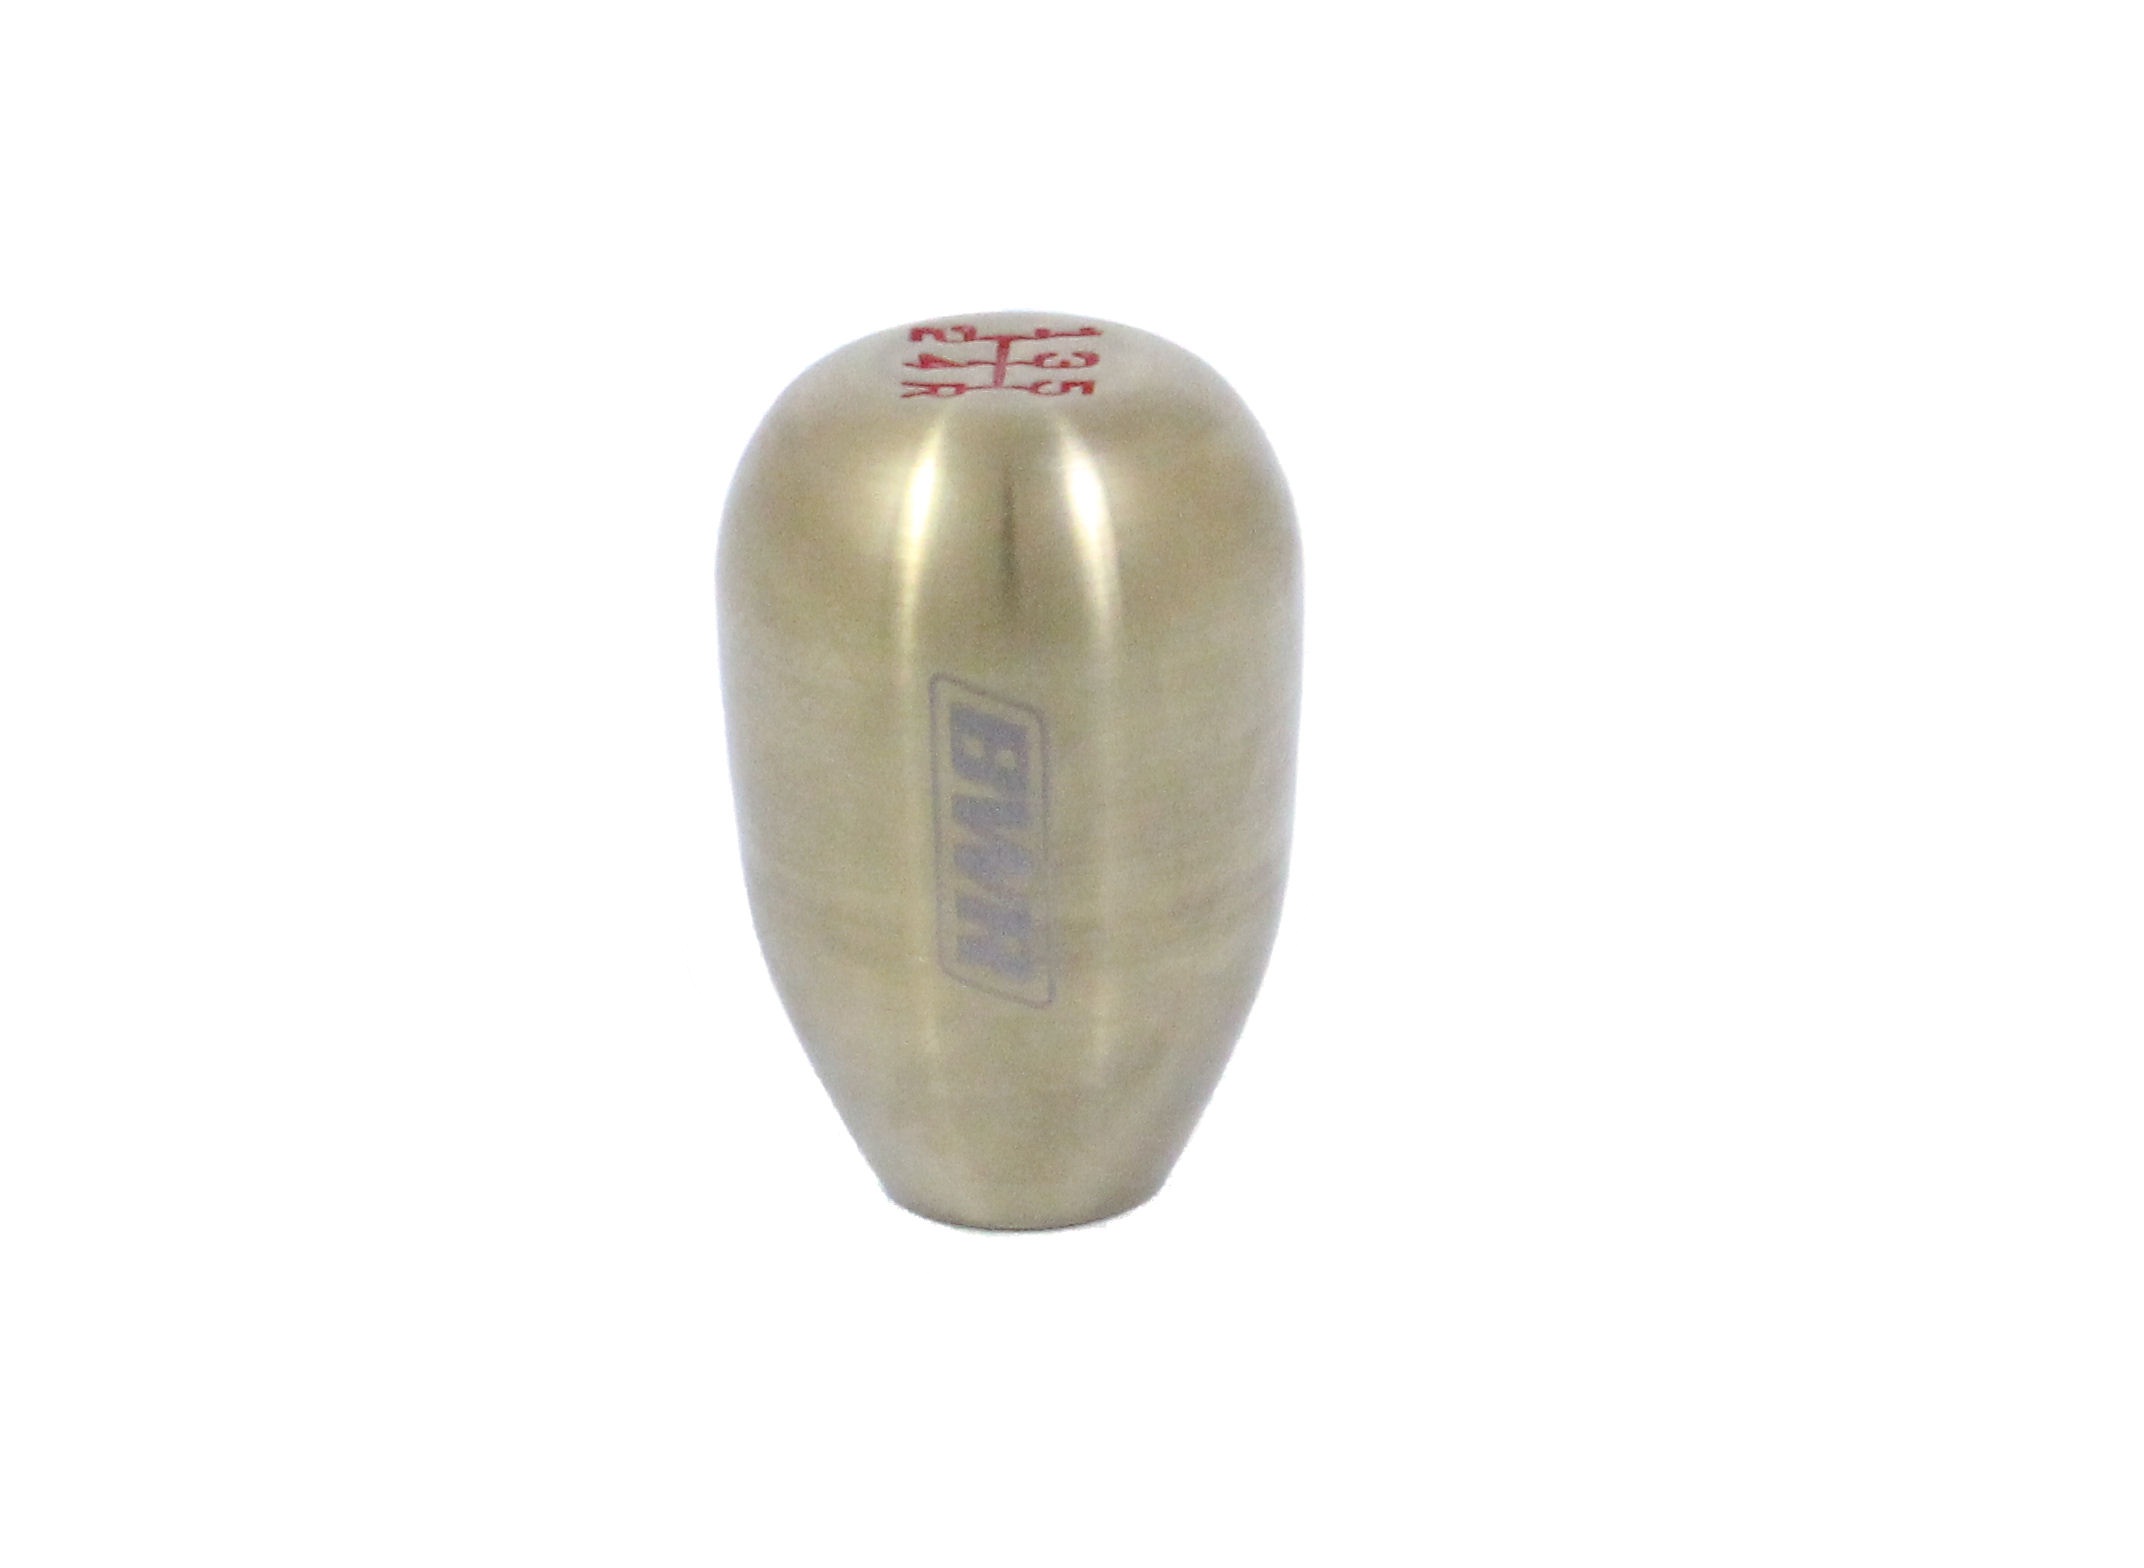 Blackworks 10x1.5 6 Speed Weighted Shift Knob - Gold